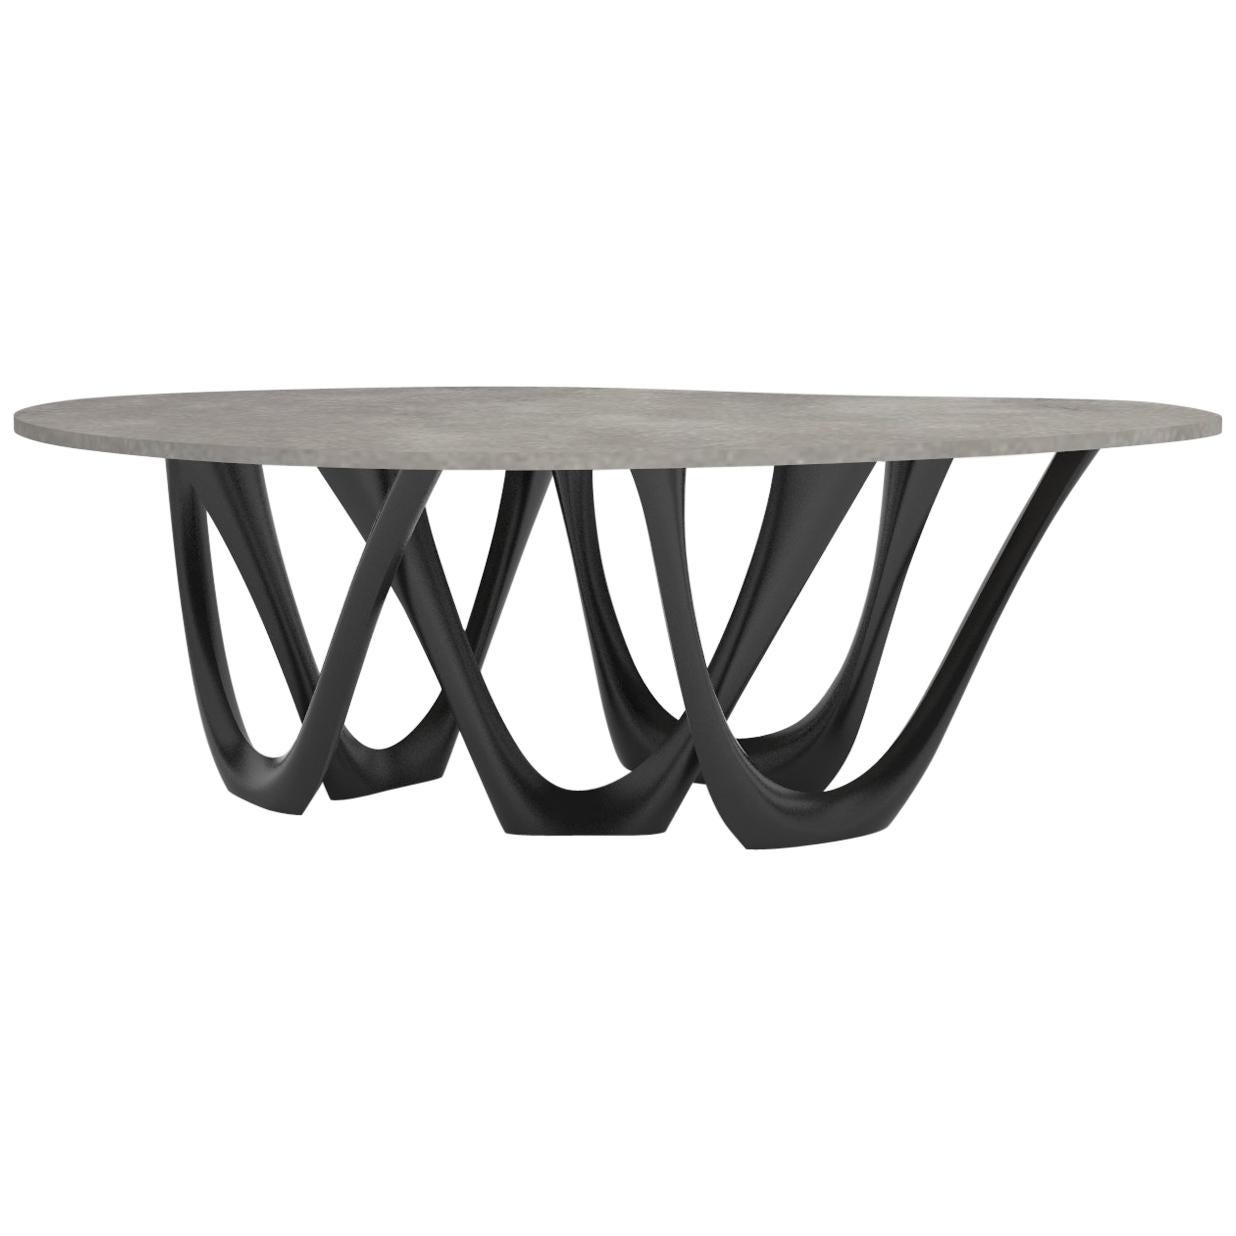 G-Table B+C in Powder-Coated Steel with Concrete Top by Zieta